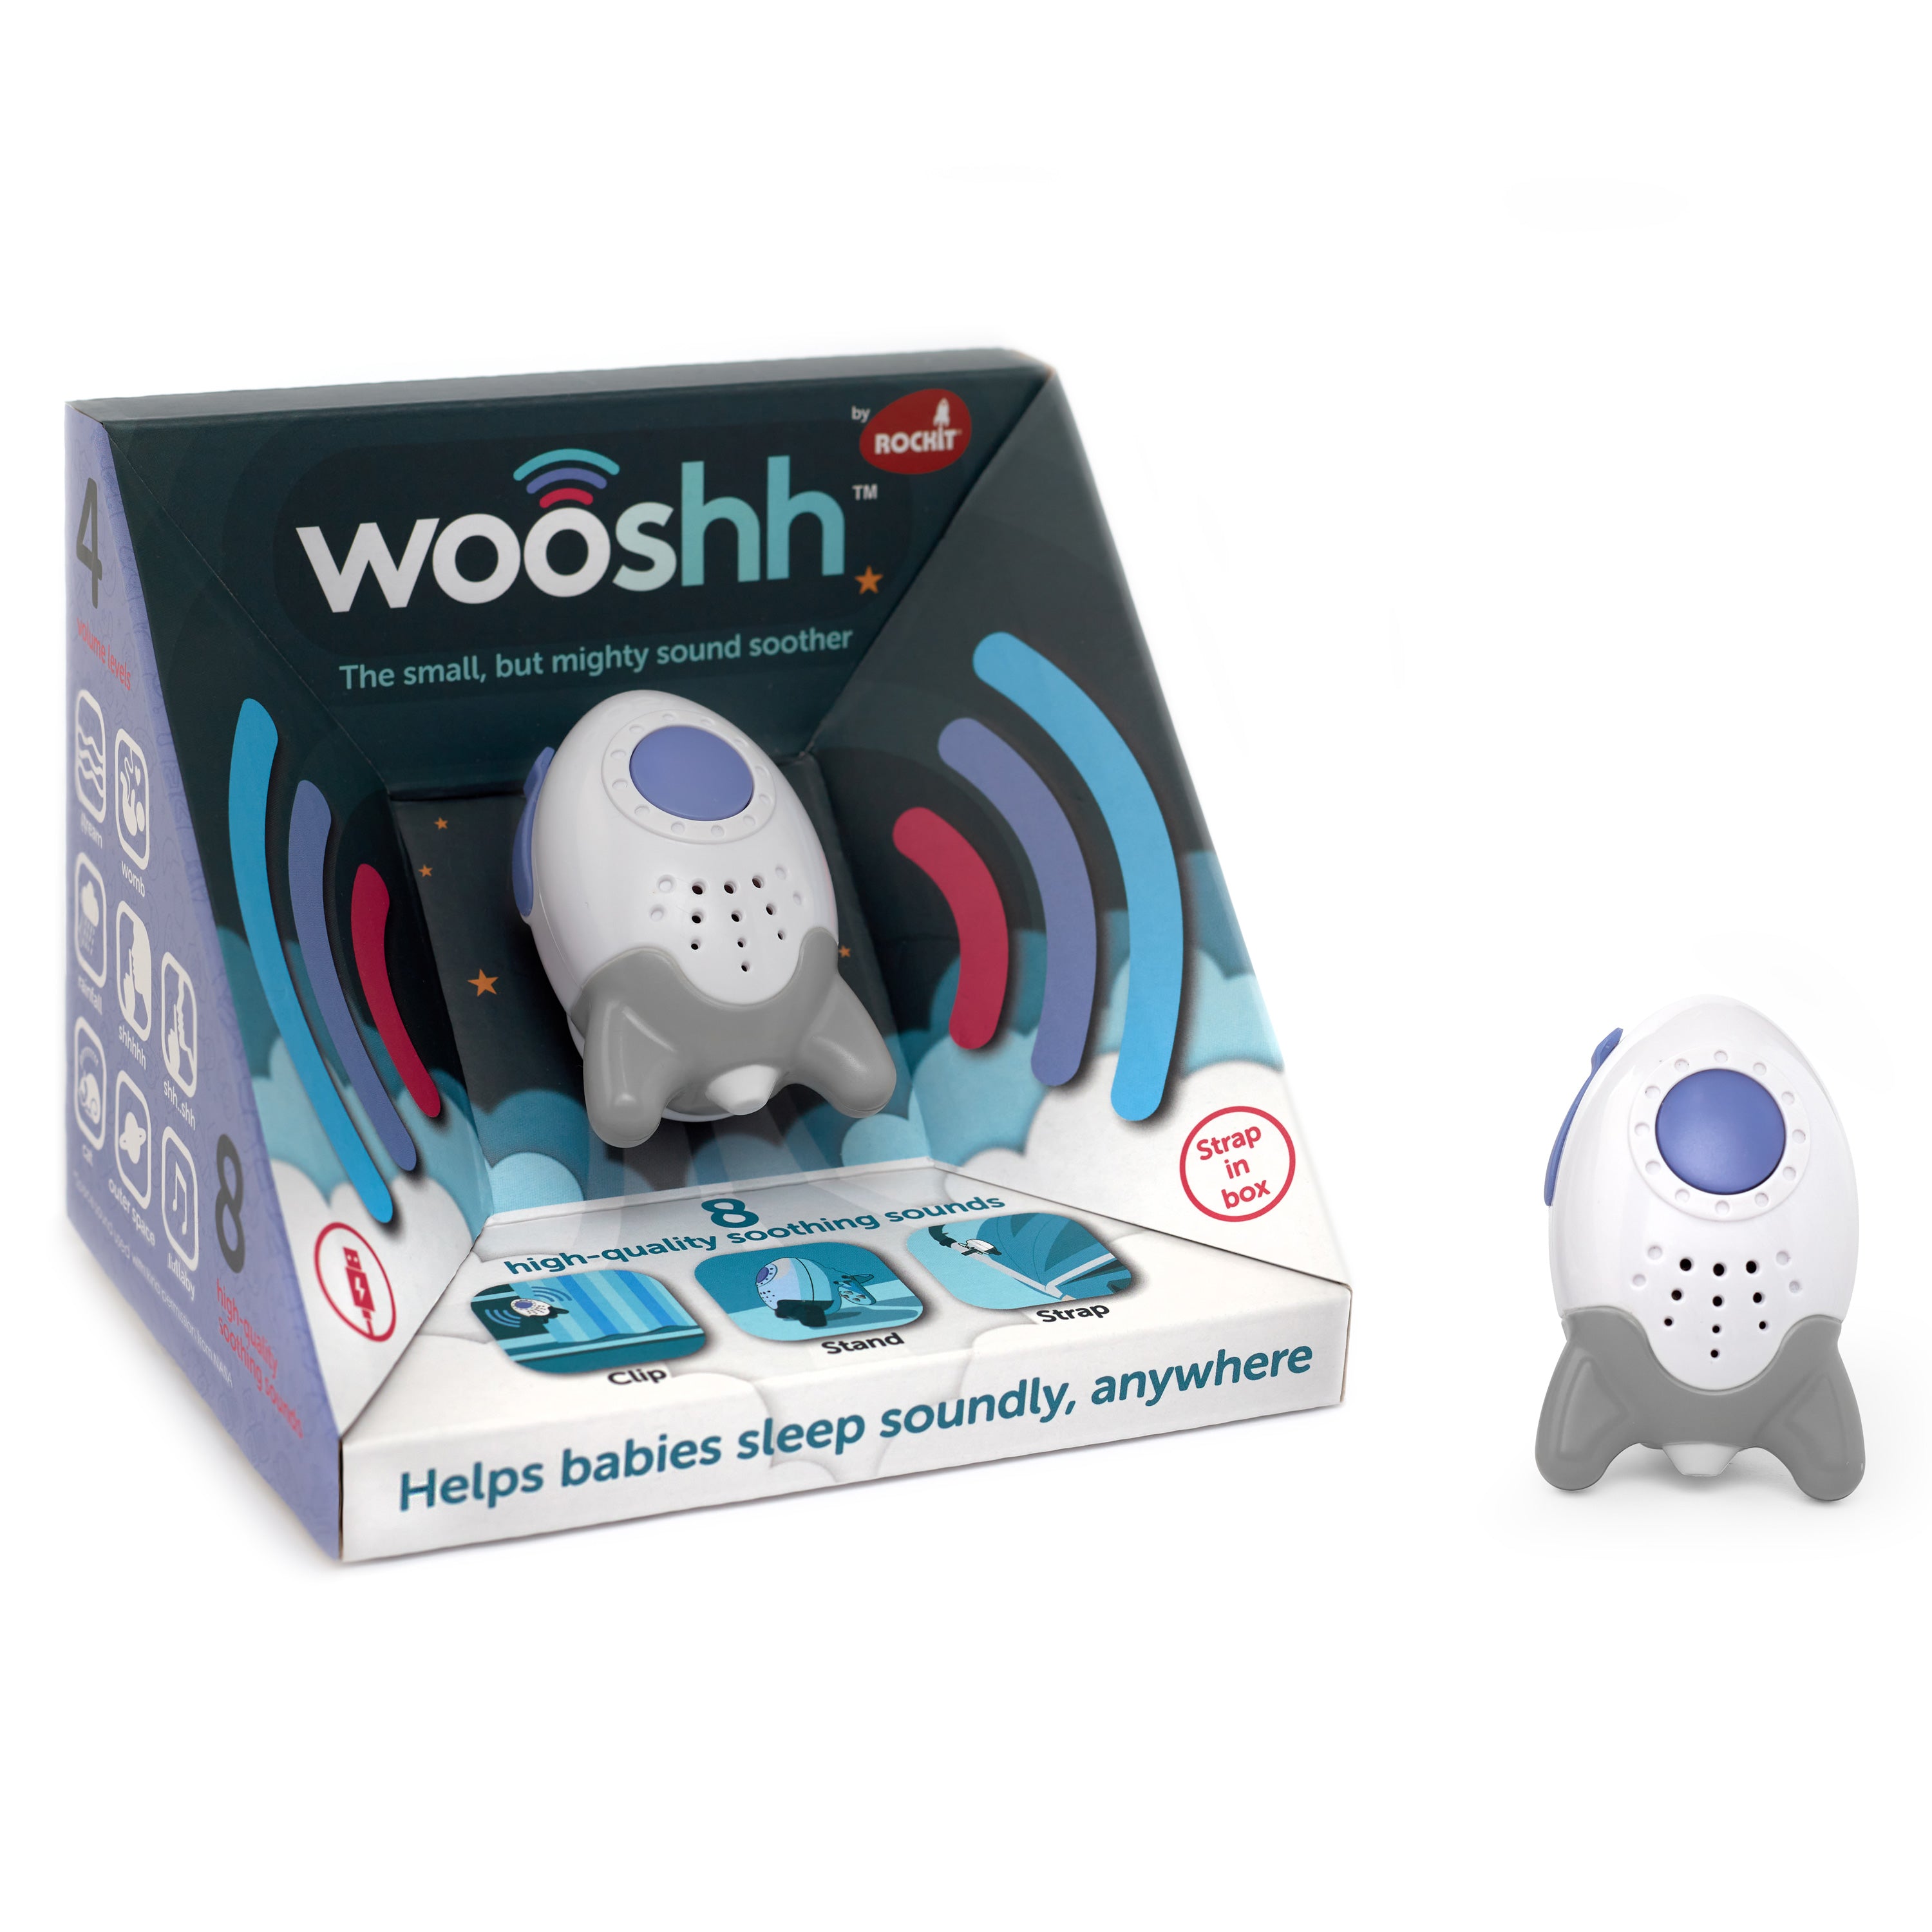 rockit whoosh travel soother